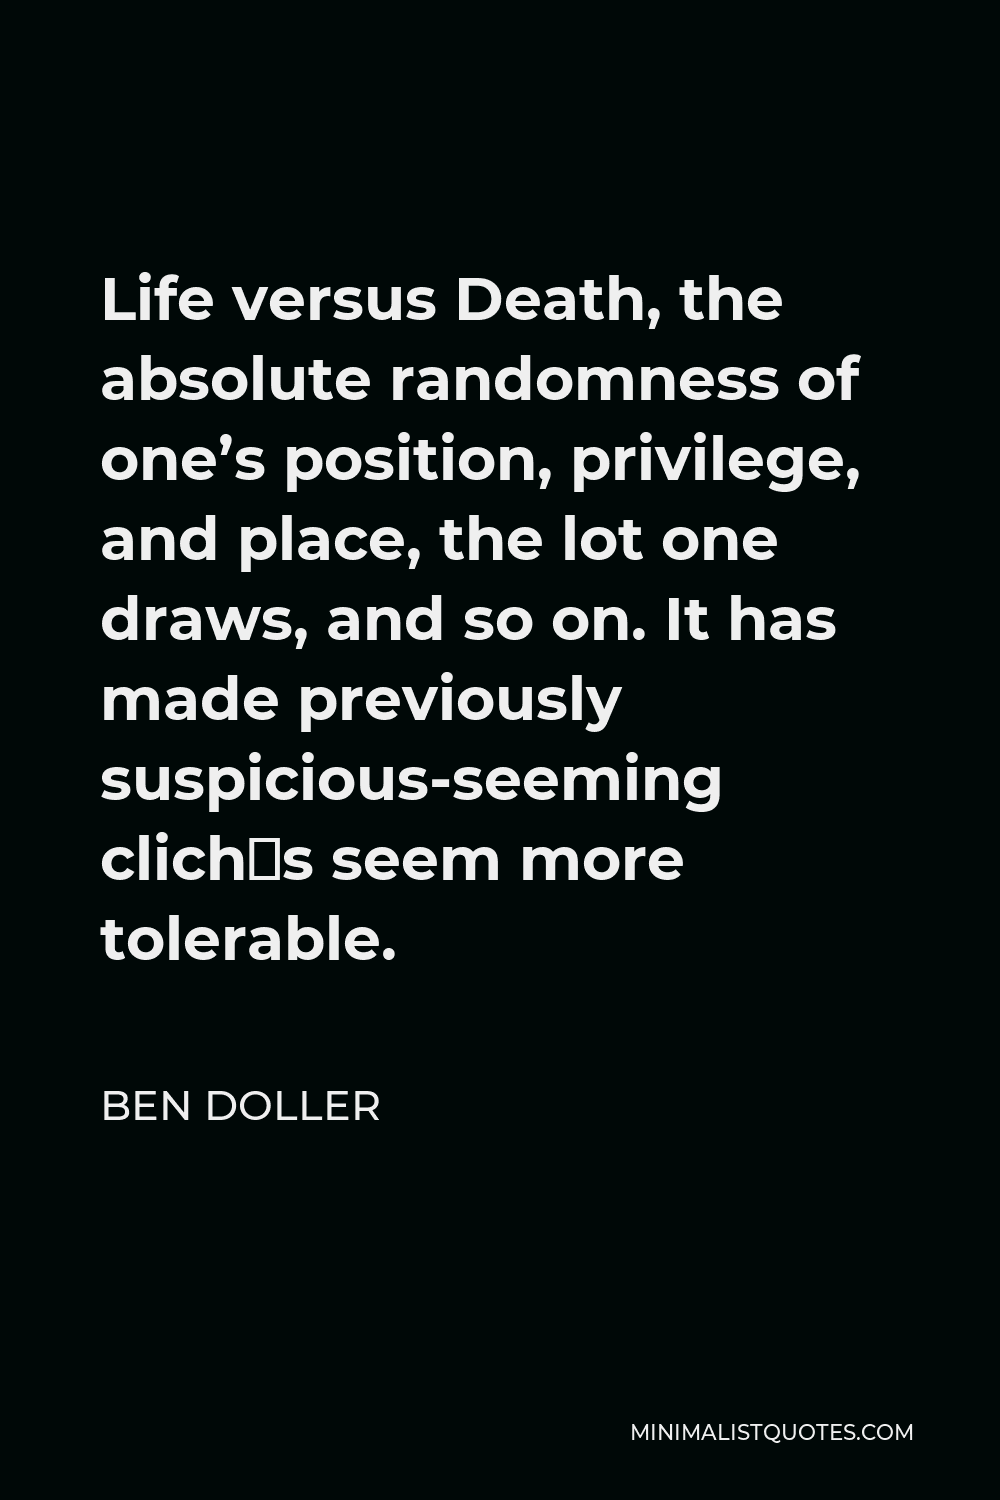 Ben Doller Quote - Life versus Death, the absolute randomness of one’s position, privilege, and place, the lot one draws, and so on. It has made previously suspicious-seeming clichés seem more tolerable.